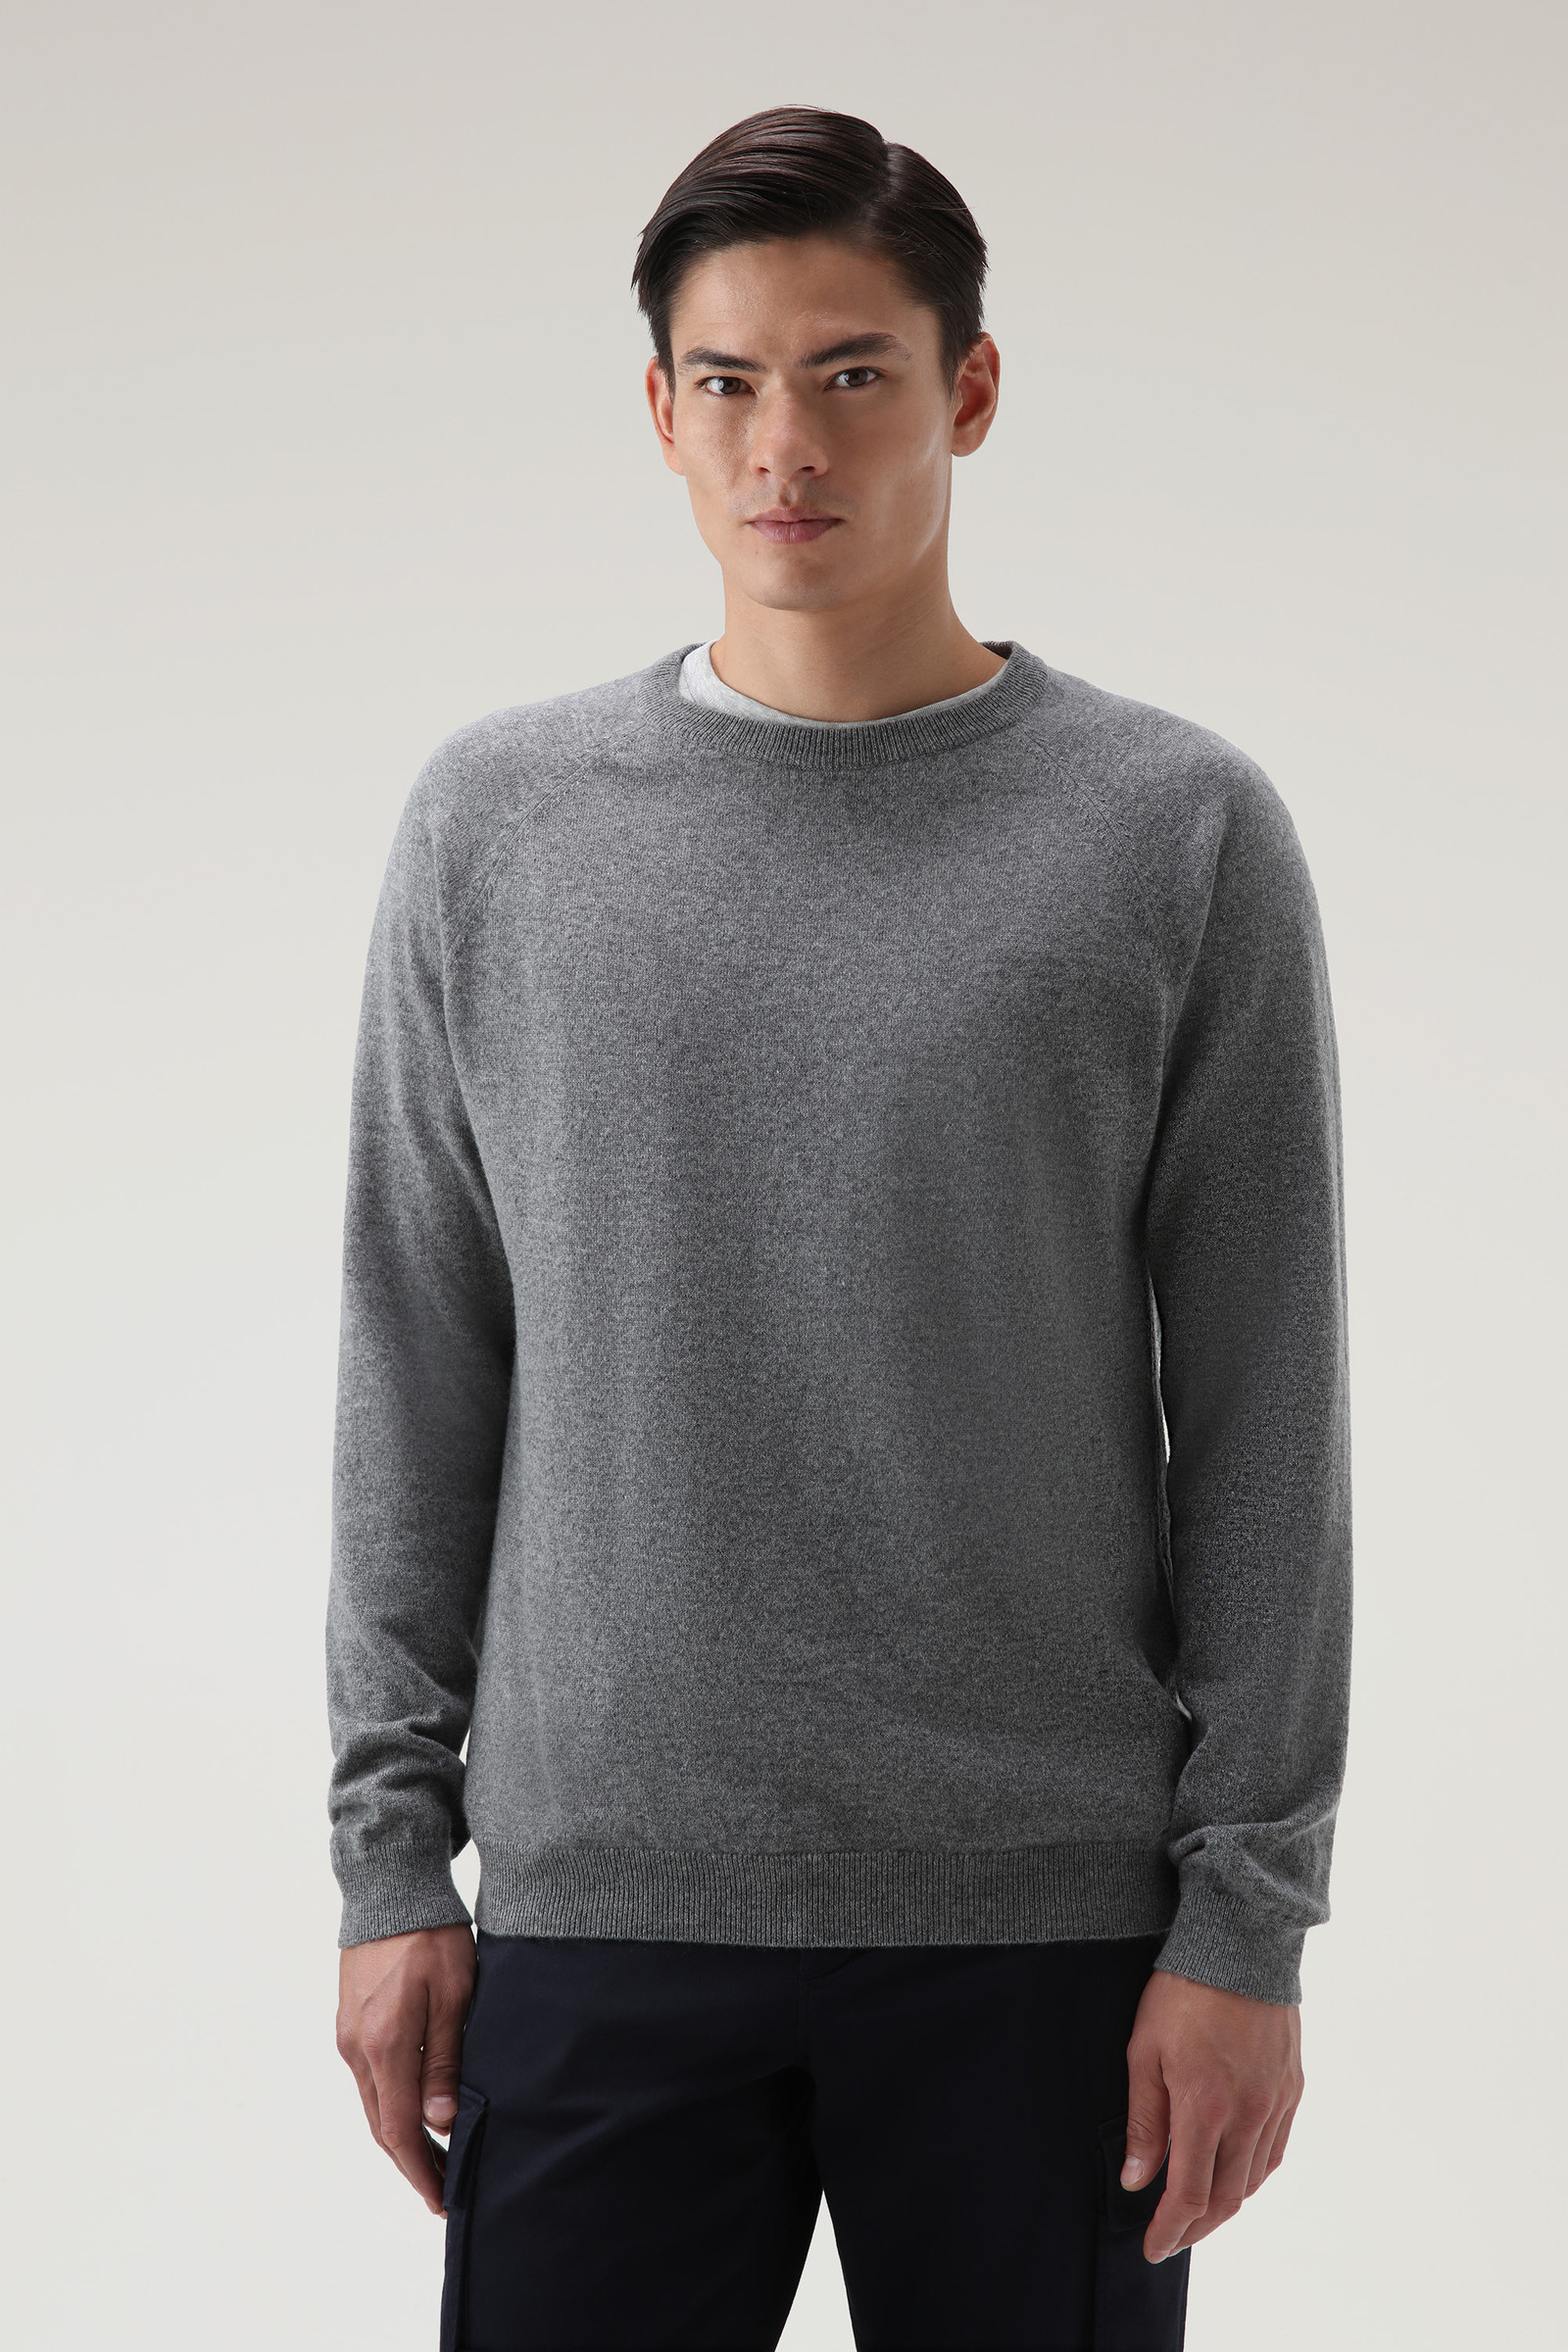 Men's Luxe Crewneck in Pure Cashmere Grey | Woolrich USA